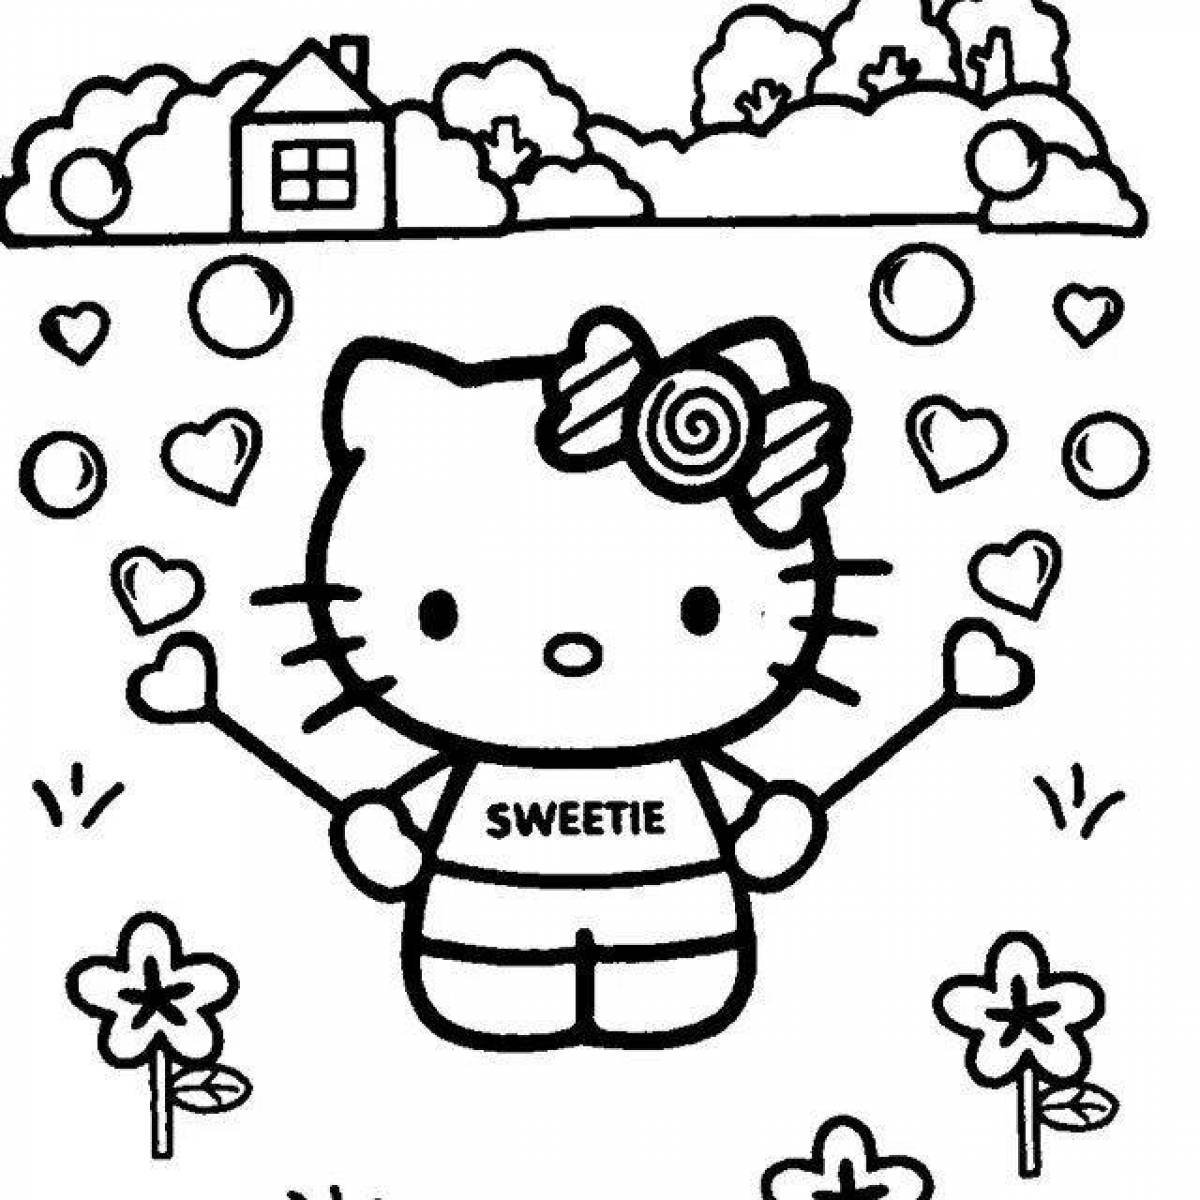 Creative hello kitty coloring without clothes